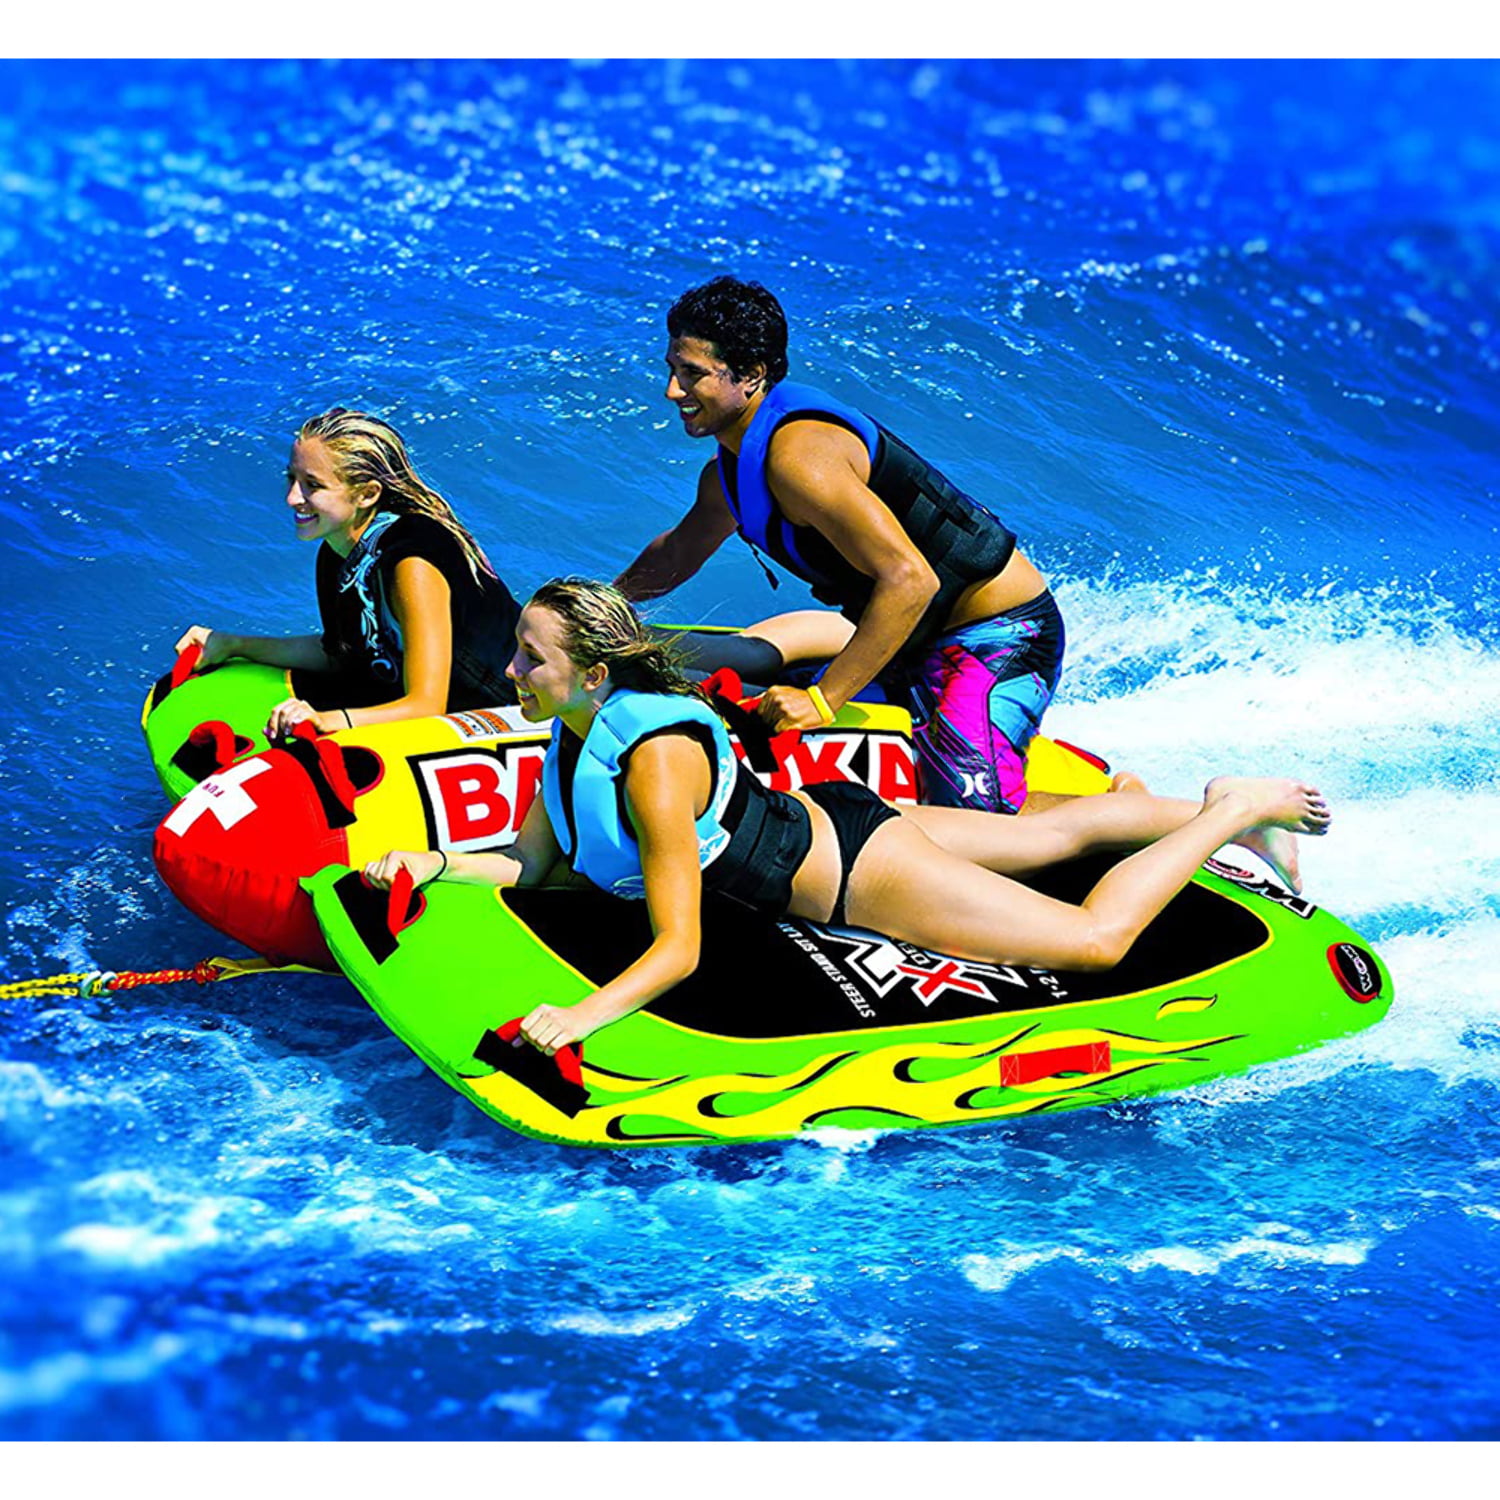 Green Details about   WOW Watersports 13-1010 Big Bazooka Steerable 1 to 4 Person Towable Tube 